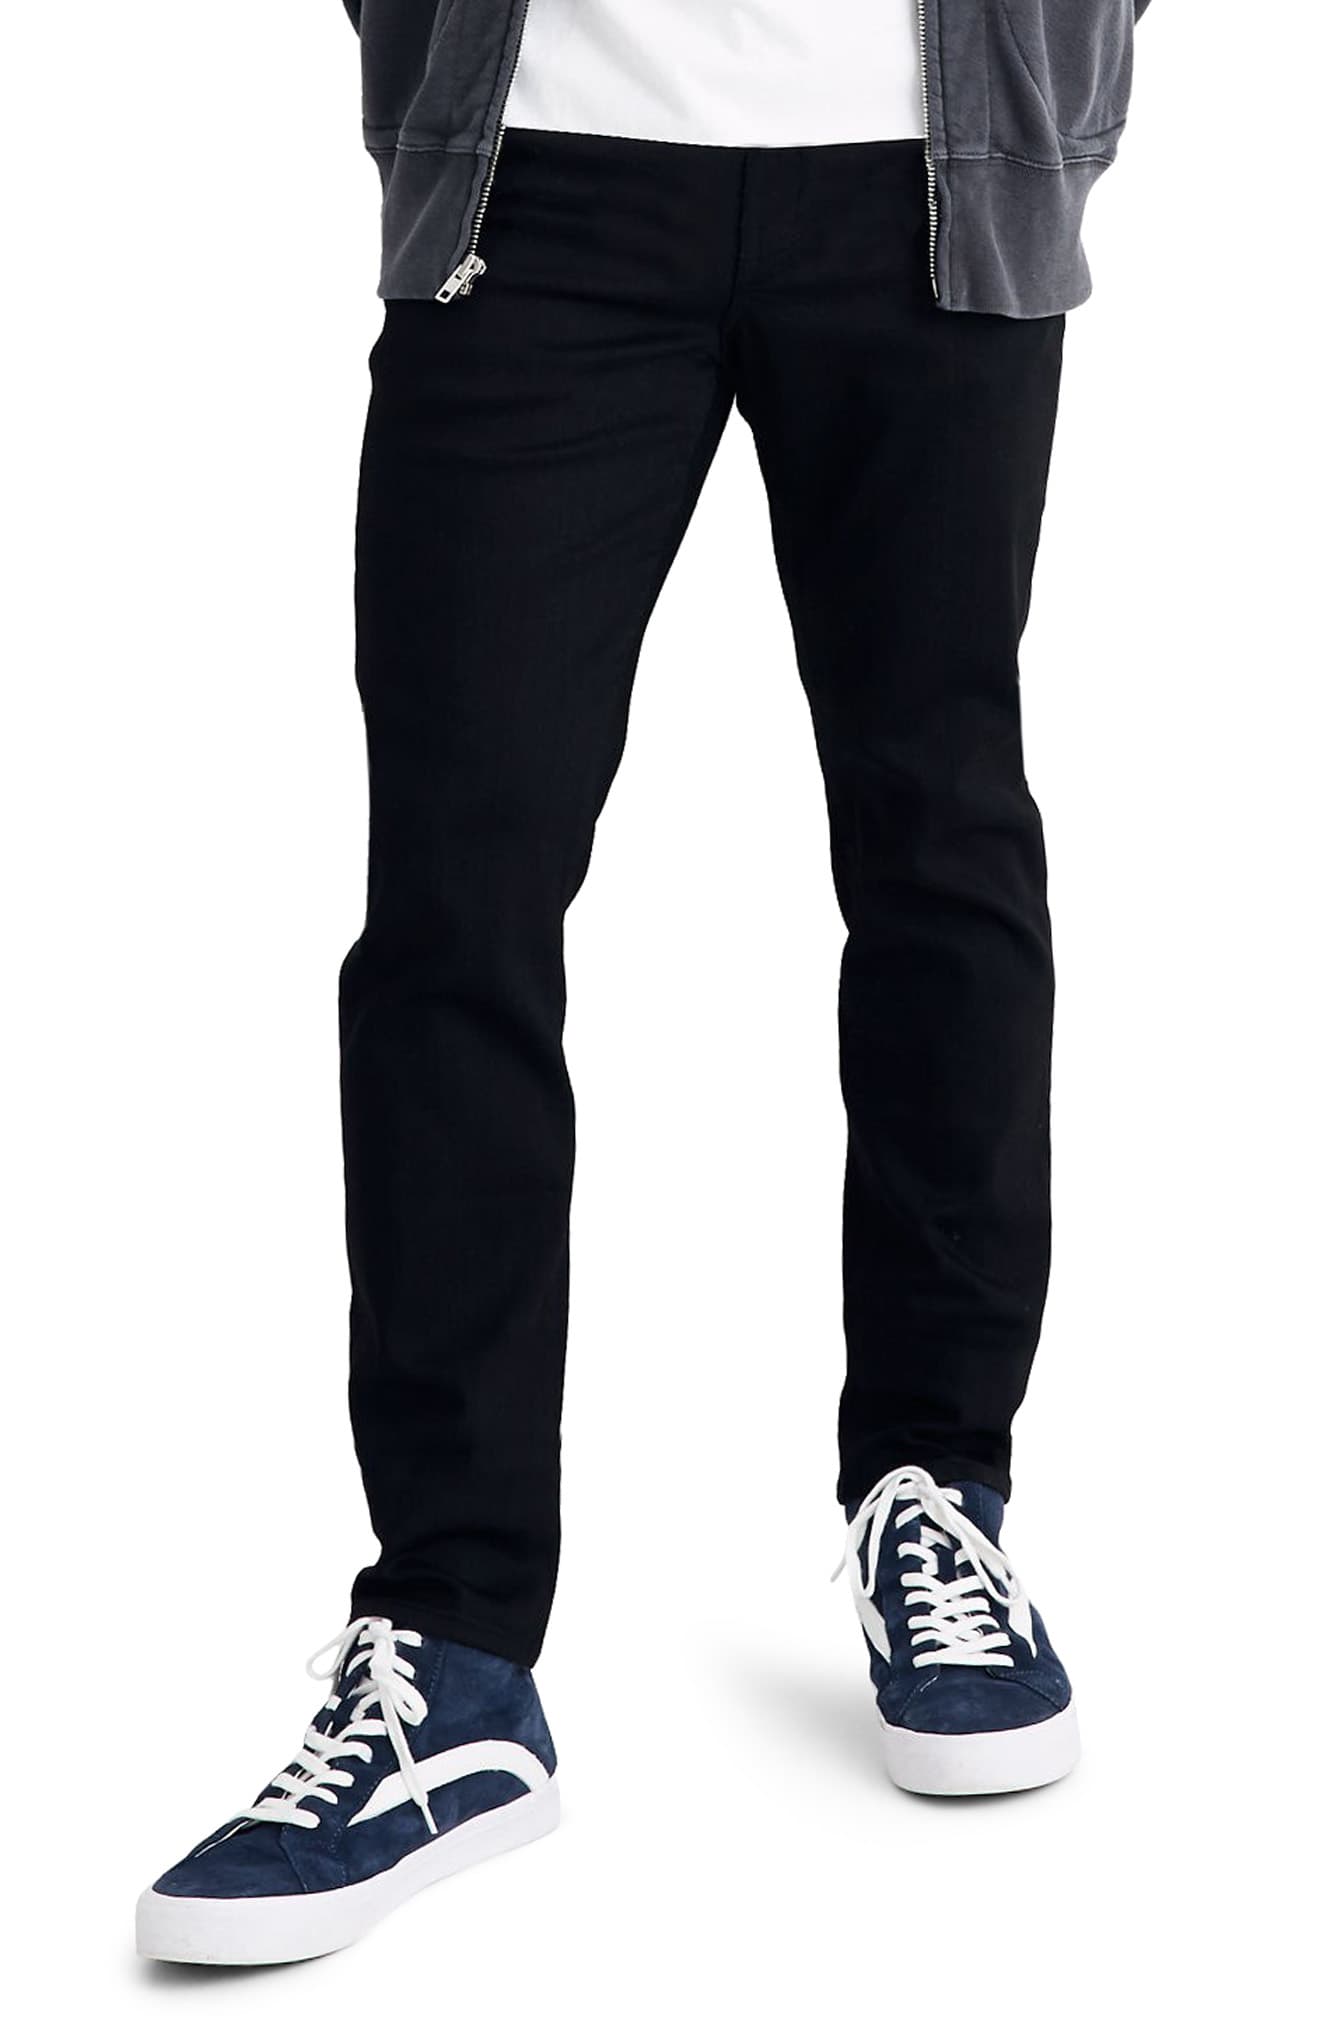 black fitted jeans